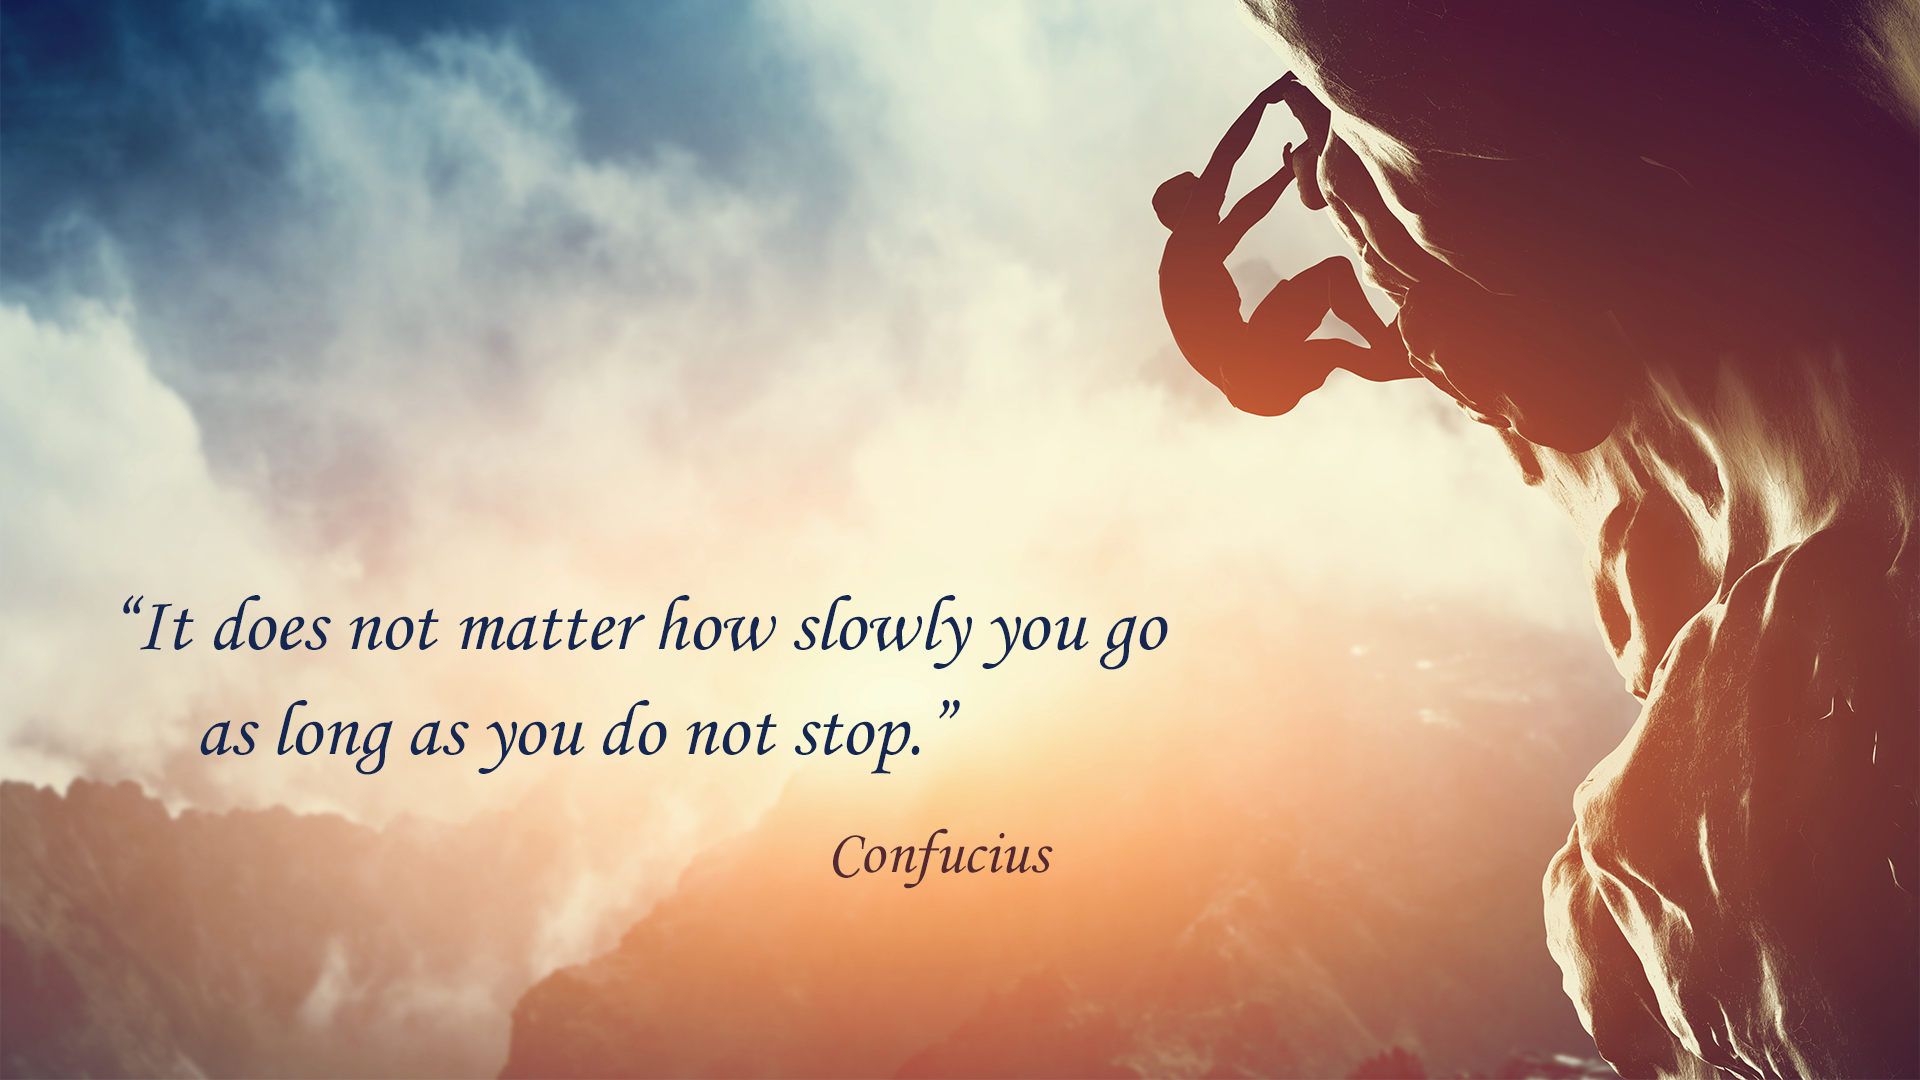 Free Graphic | Inspirational Quotes | Quote by Confucius